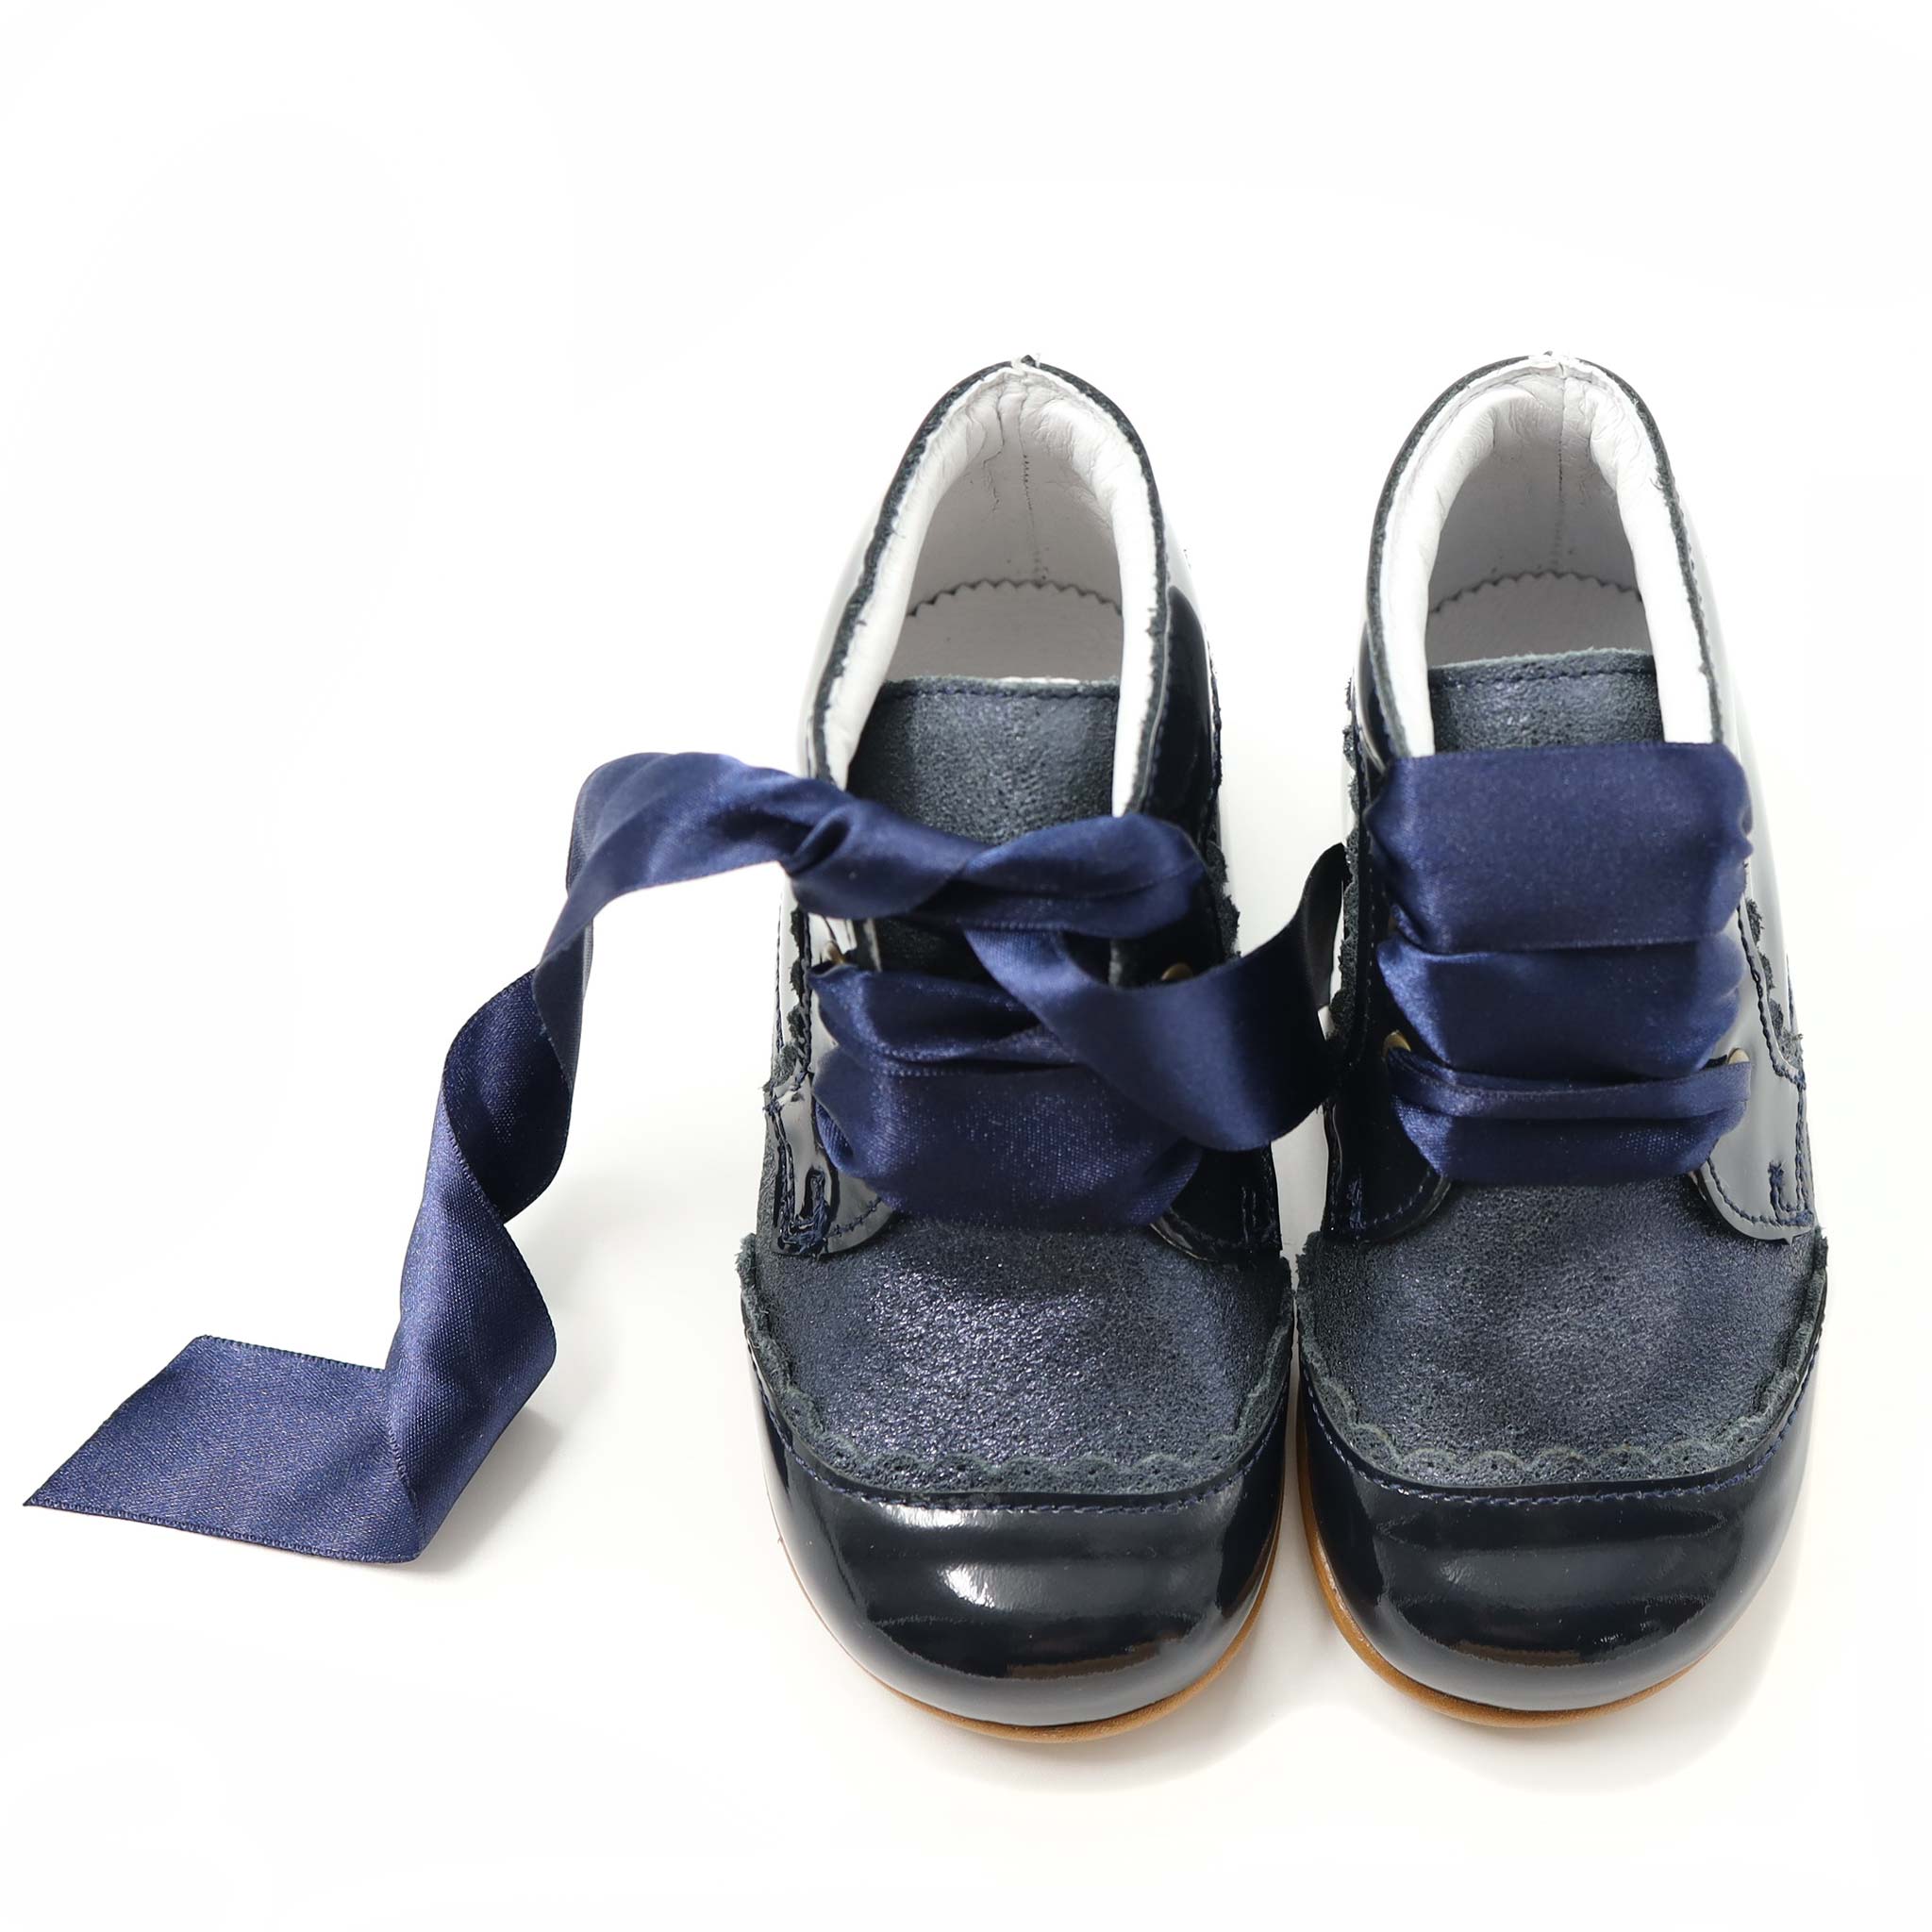 girls patent leather girls navy boots with satin laces